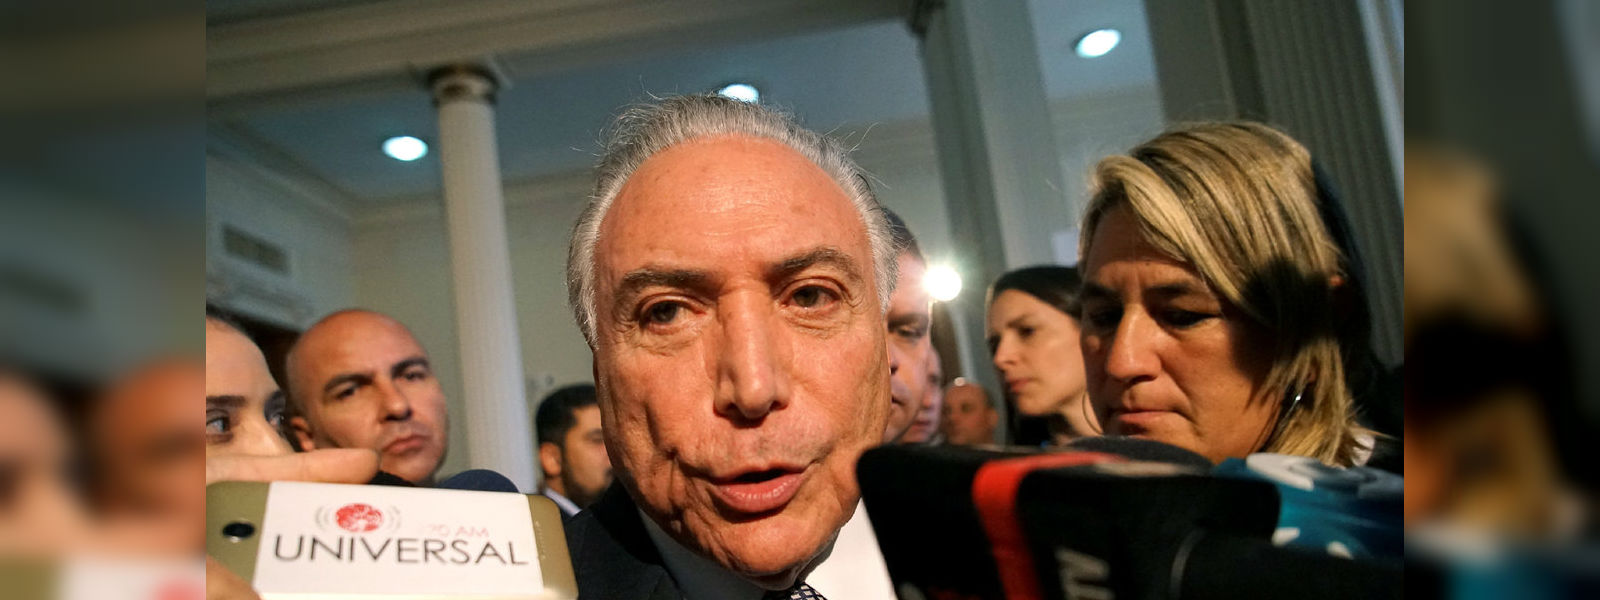 Temer returns home after release from prison